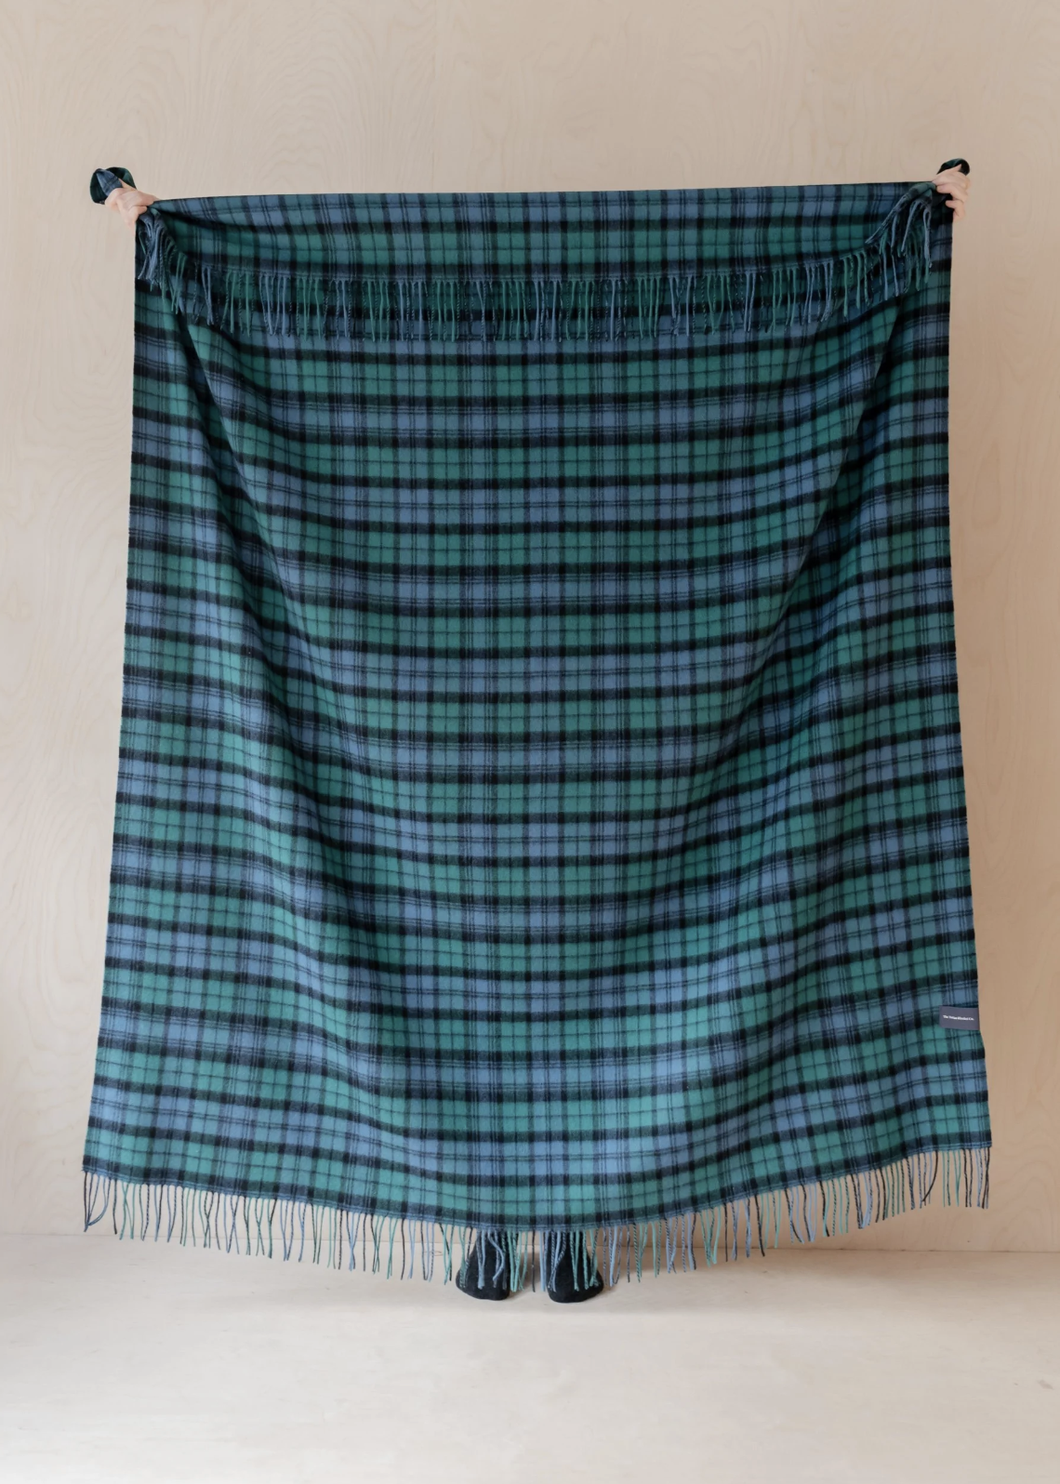 Lambswool Blanket in Campbell of Argyll Ancient Tartan